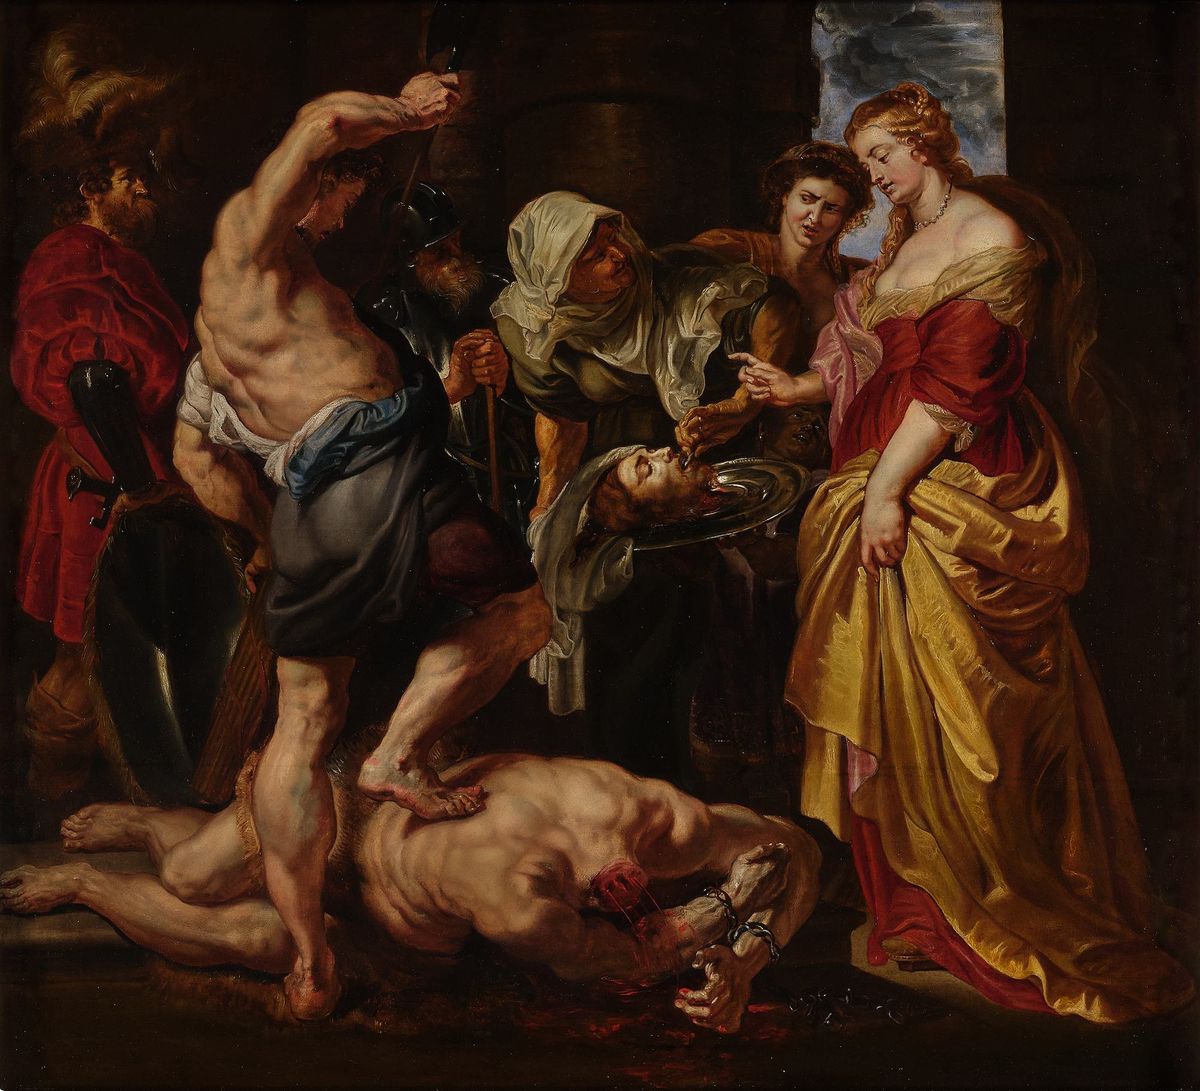 Peter Paul Rubens, Salome presented with the severed head of Saint John the Baptist (around 1609), est $25m-$35m Courtesy Sotheby's